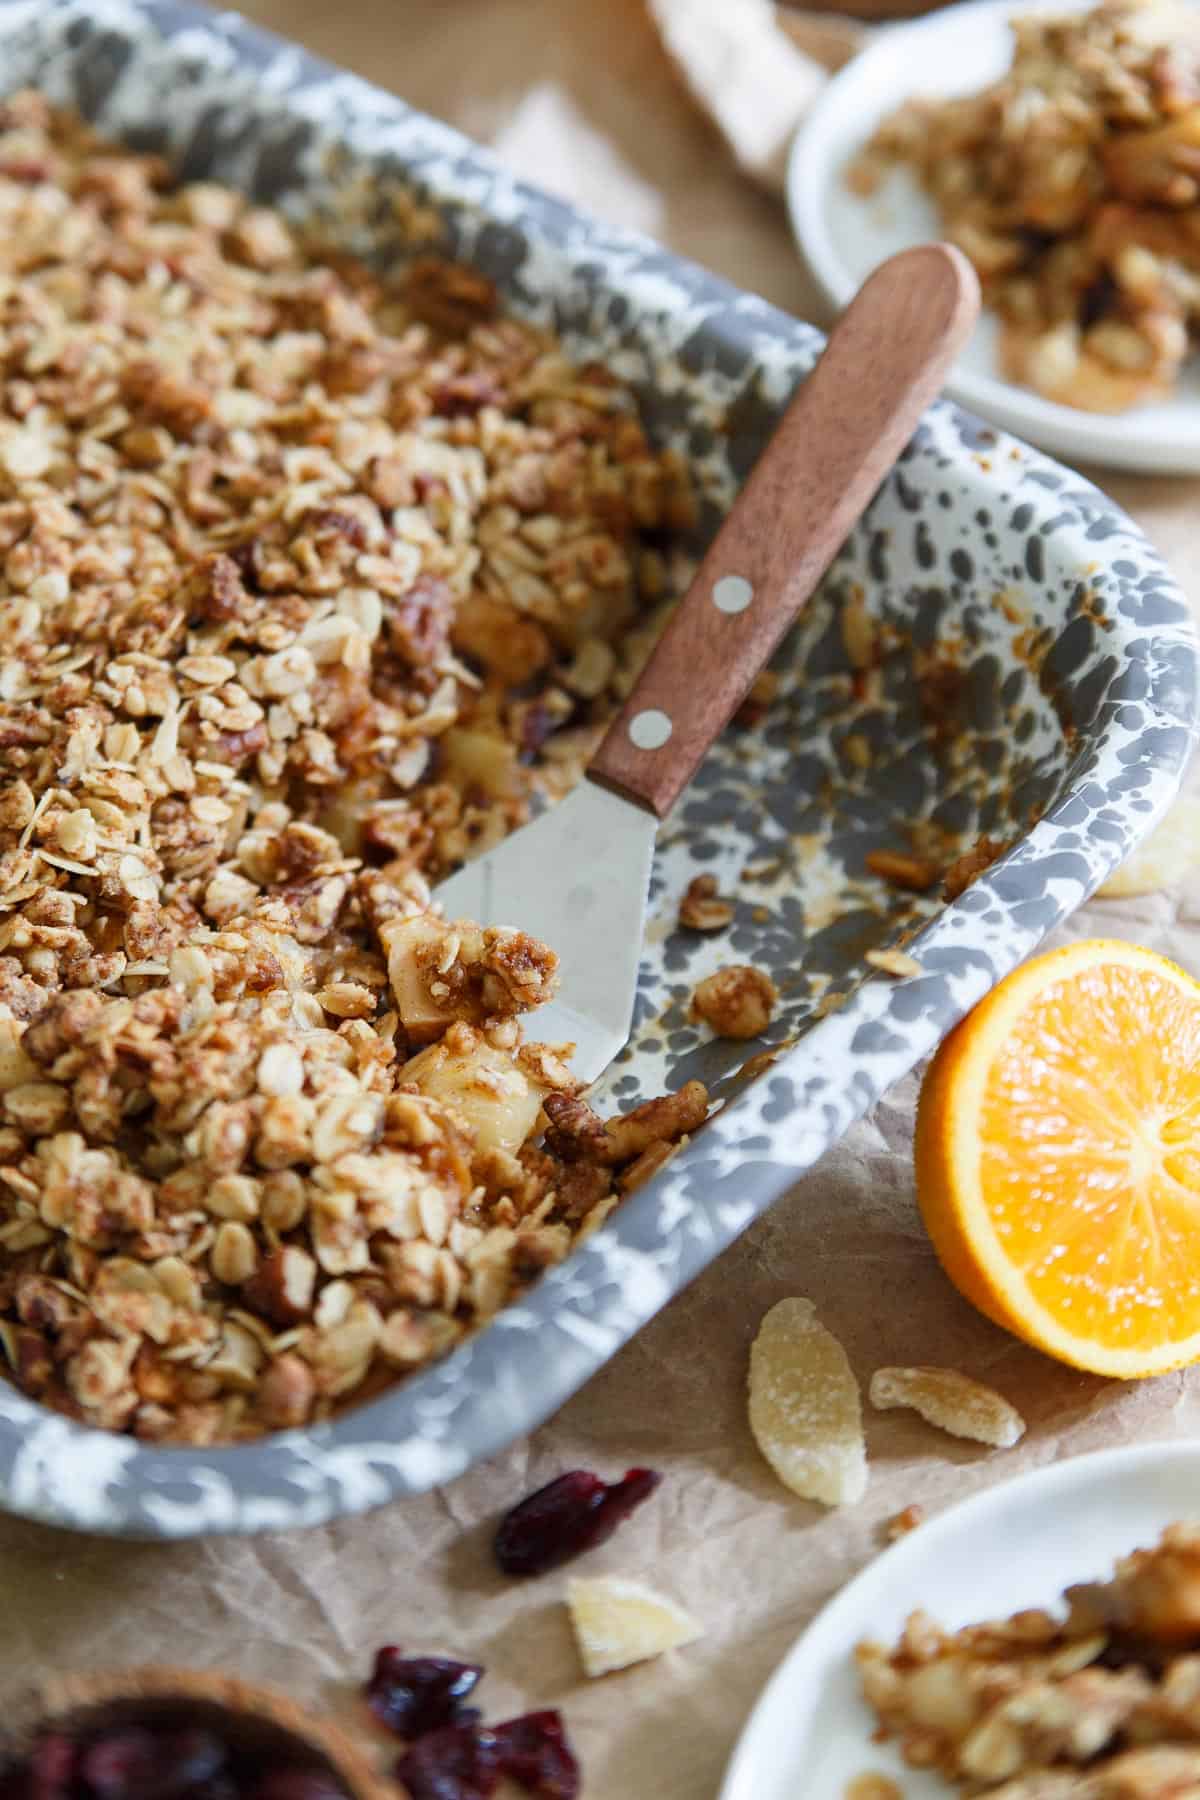 This orange ginger pear and quince crisp will make your whole house smell like the perfect fall candle while it’s baking. It’s a simple seasonal treat everyone will love and perfect with a scoop of vanilla ice cream on top!